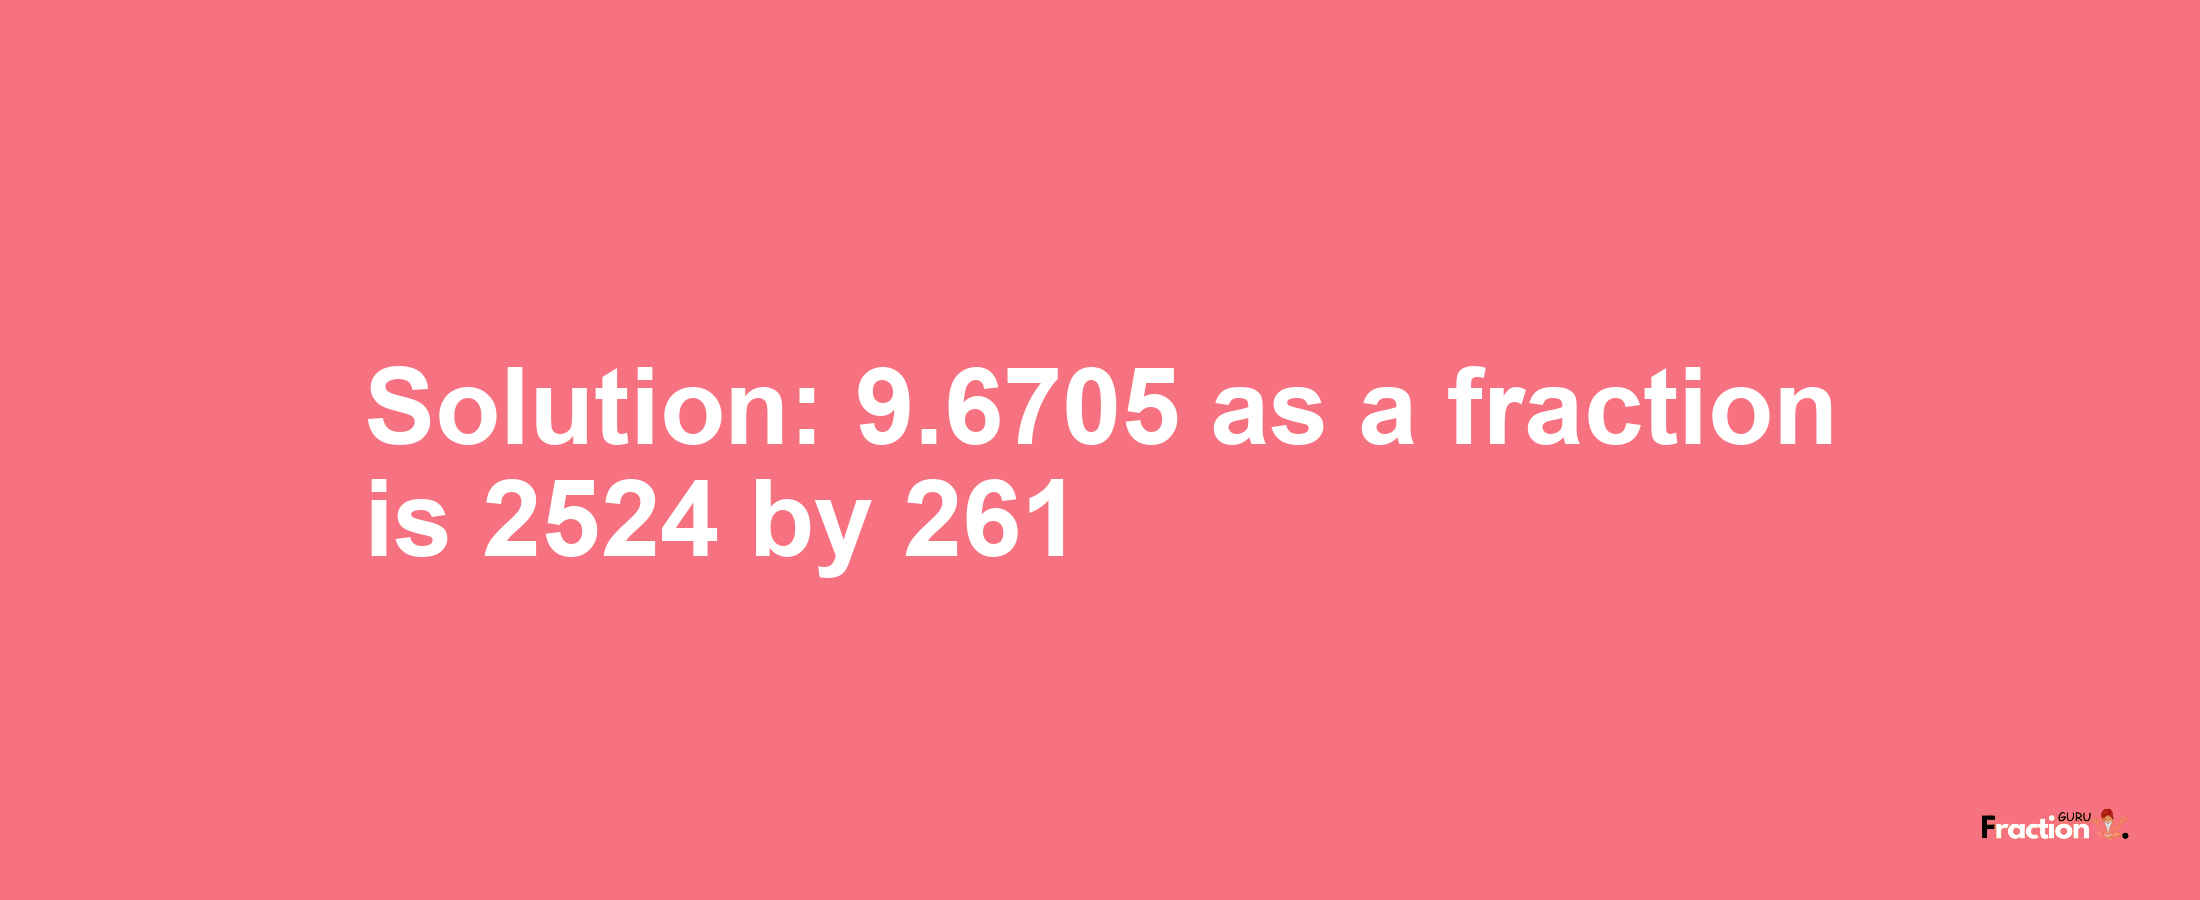 Solution:9.6705 as a fraction is 2524/261